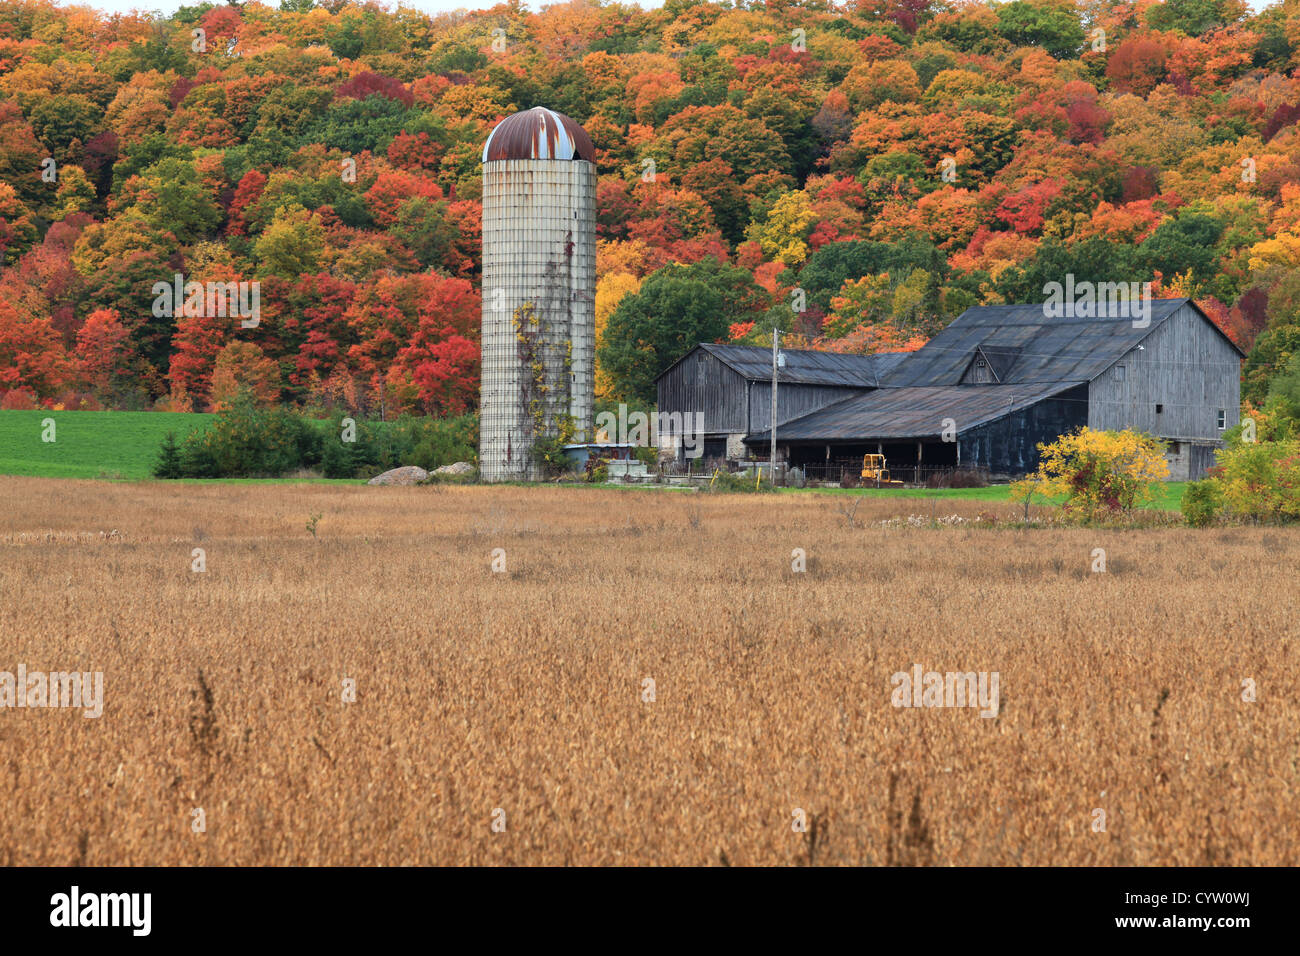 Canadian rural landscape in autumn colors Stock Photo